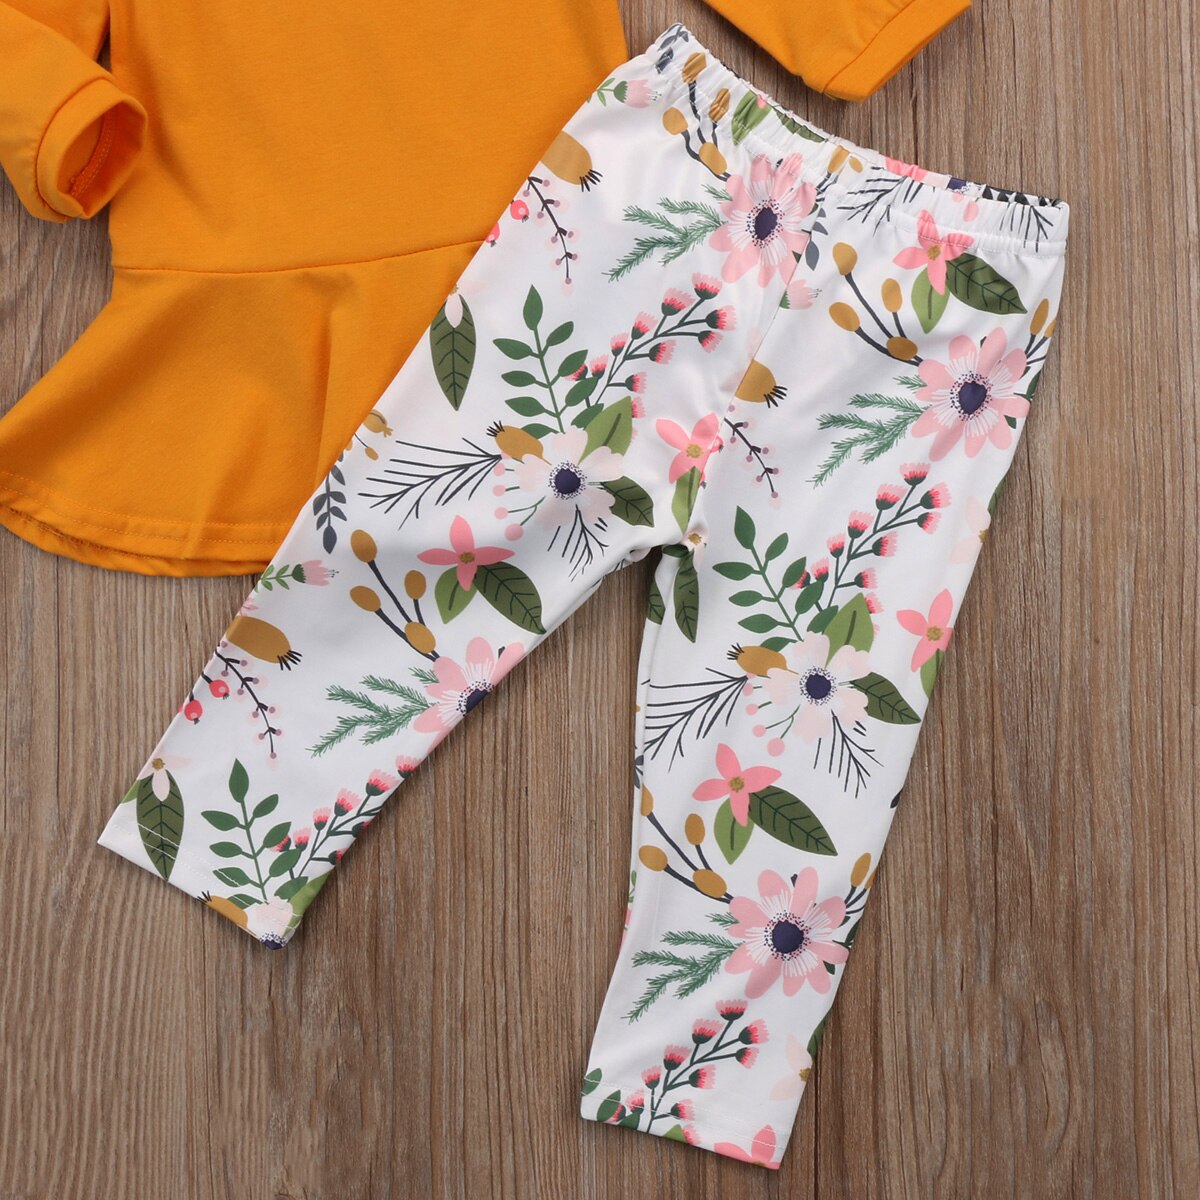 Fashion Flower 2-7Y Toddler Kids Girls Outfits Clothes Long Sleeve T-shirt Tops +Long Pants Casual Set Warm - ebowsos